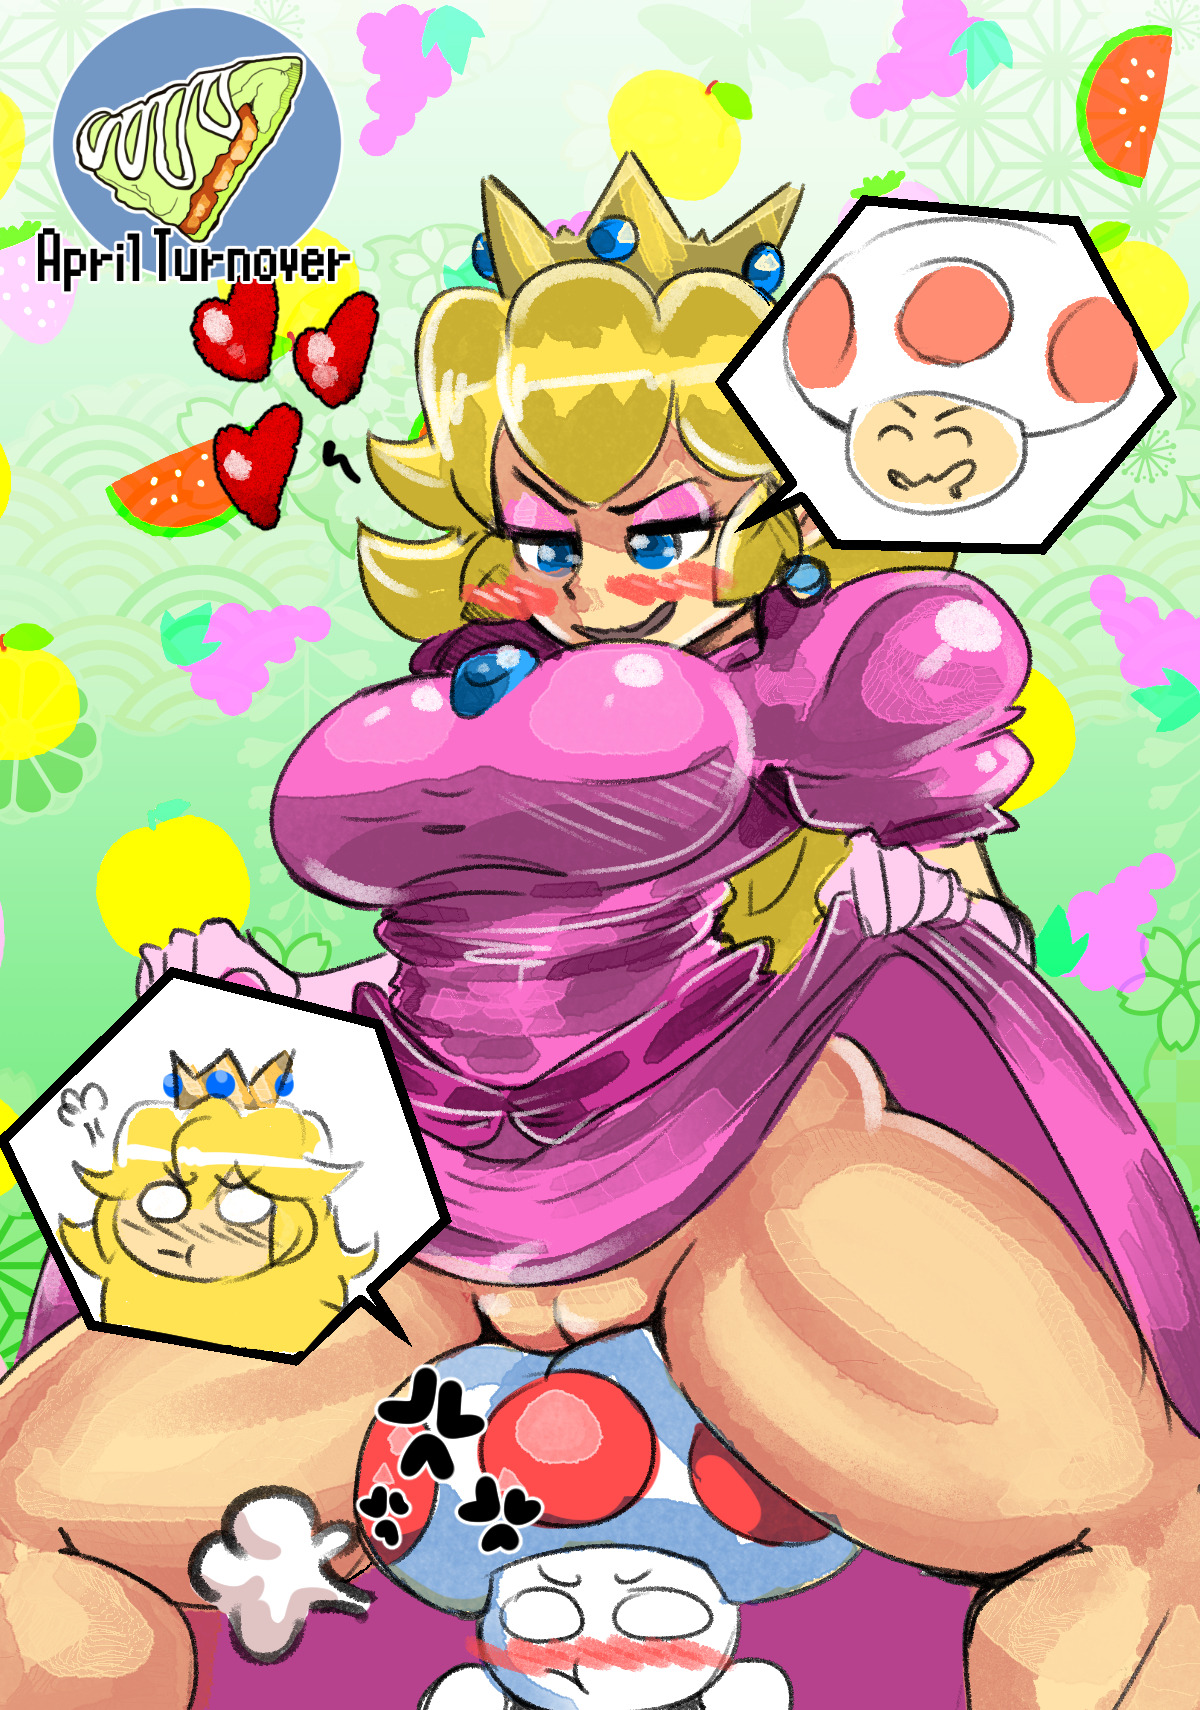   day 13 of aprilturnover princess pech and toad. ;3the censored ones are available